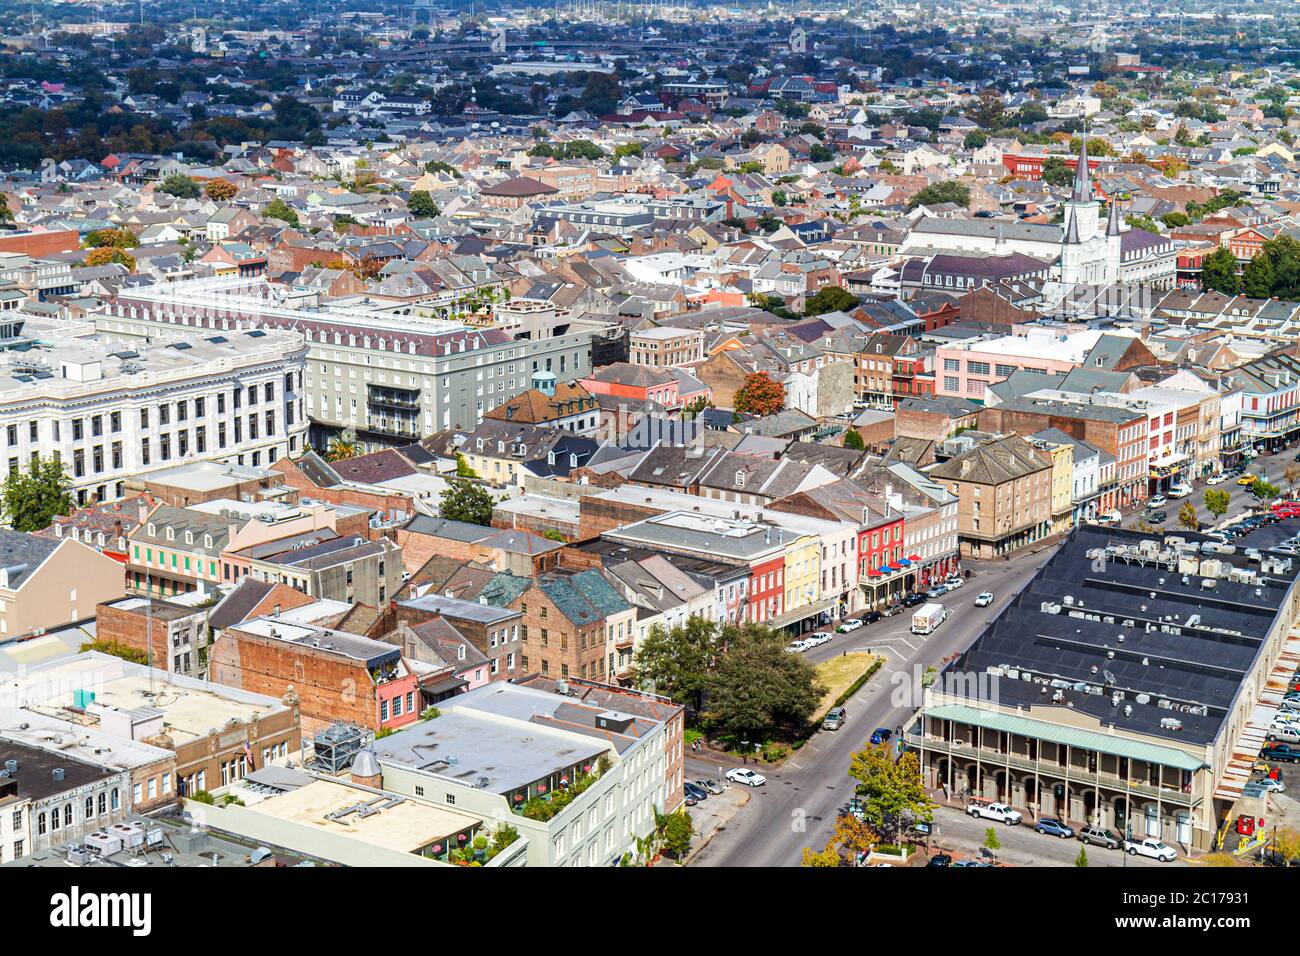 New Orleans Louisiana,French Quarter,skyline,North Peter Street,aerial overhead view from above,roof,street grid,buildings,city skyline,cars,LA1111150 Stock Photo